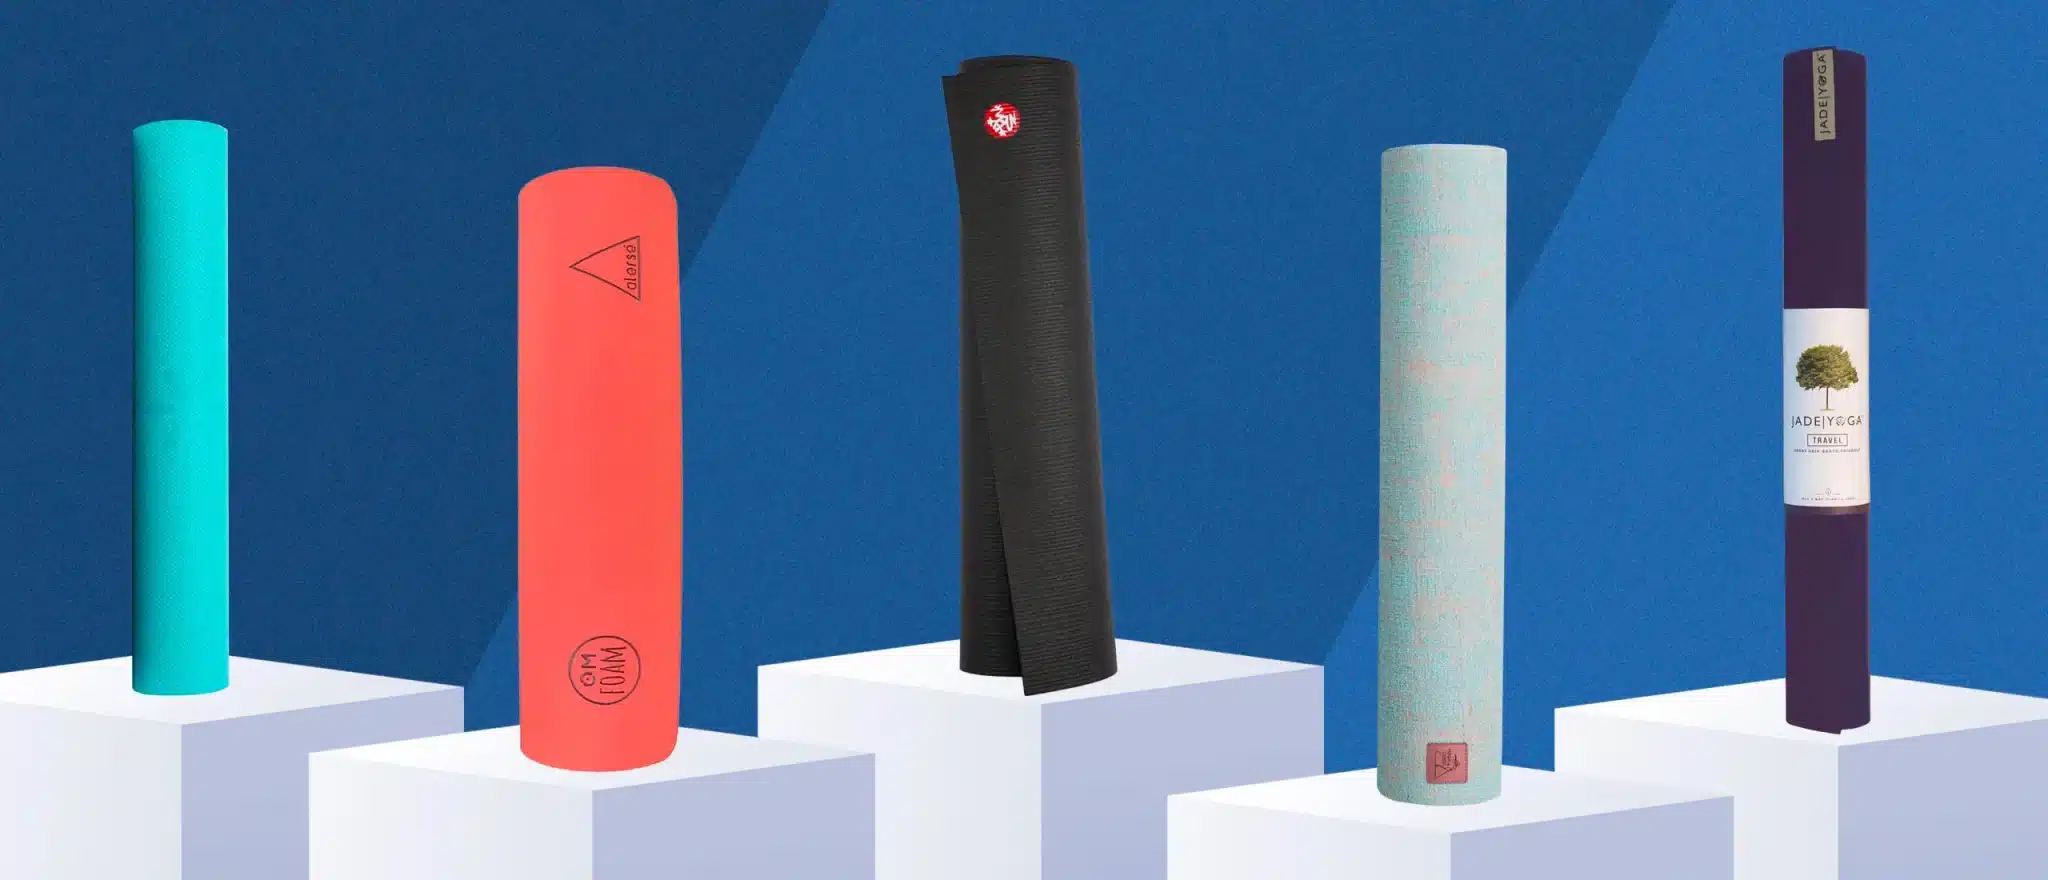 5 Non-Slip Yoga Mats That Stand Up to the Sweatiest Power Flows